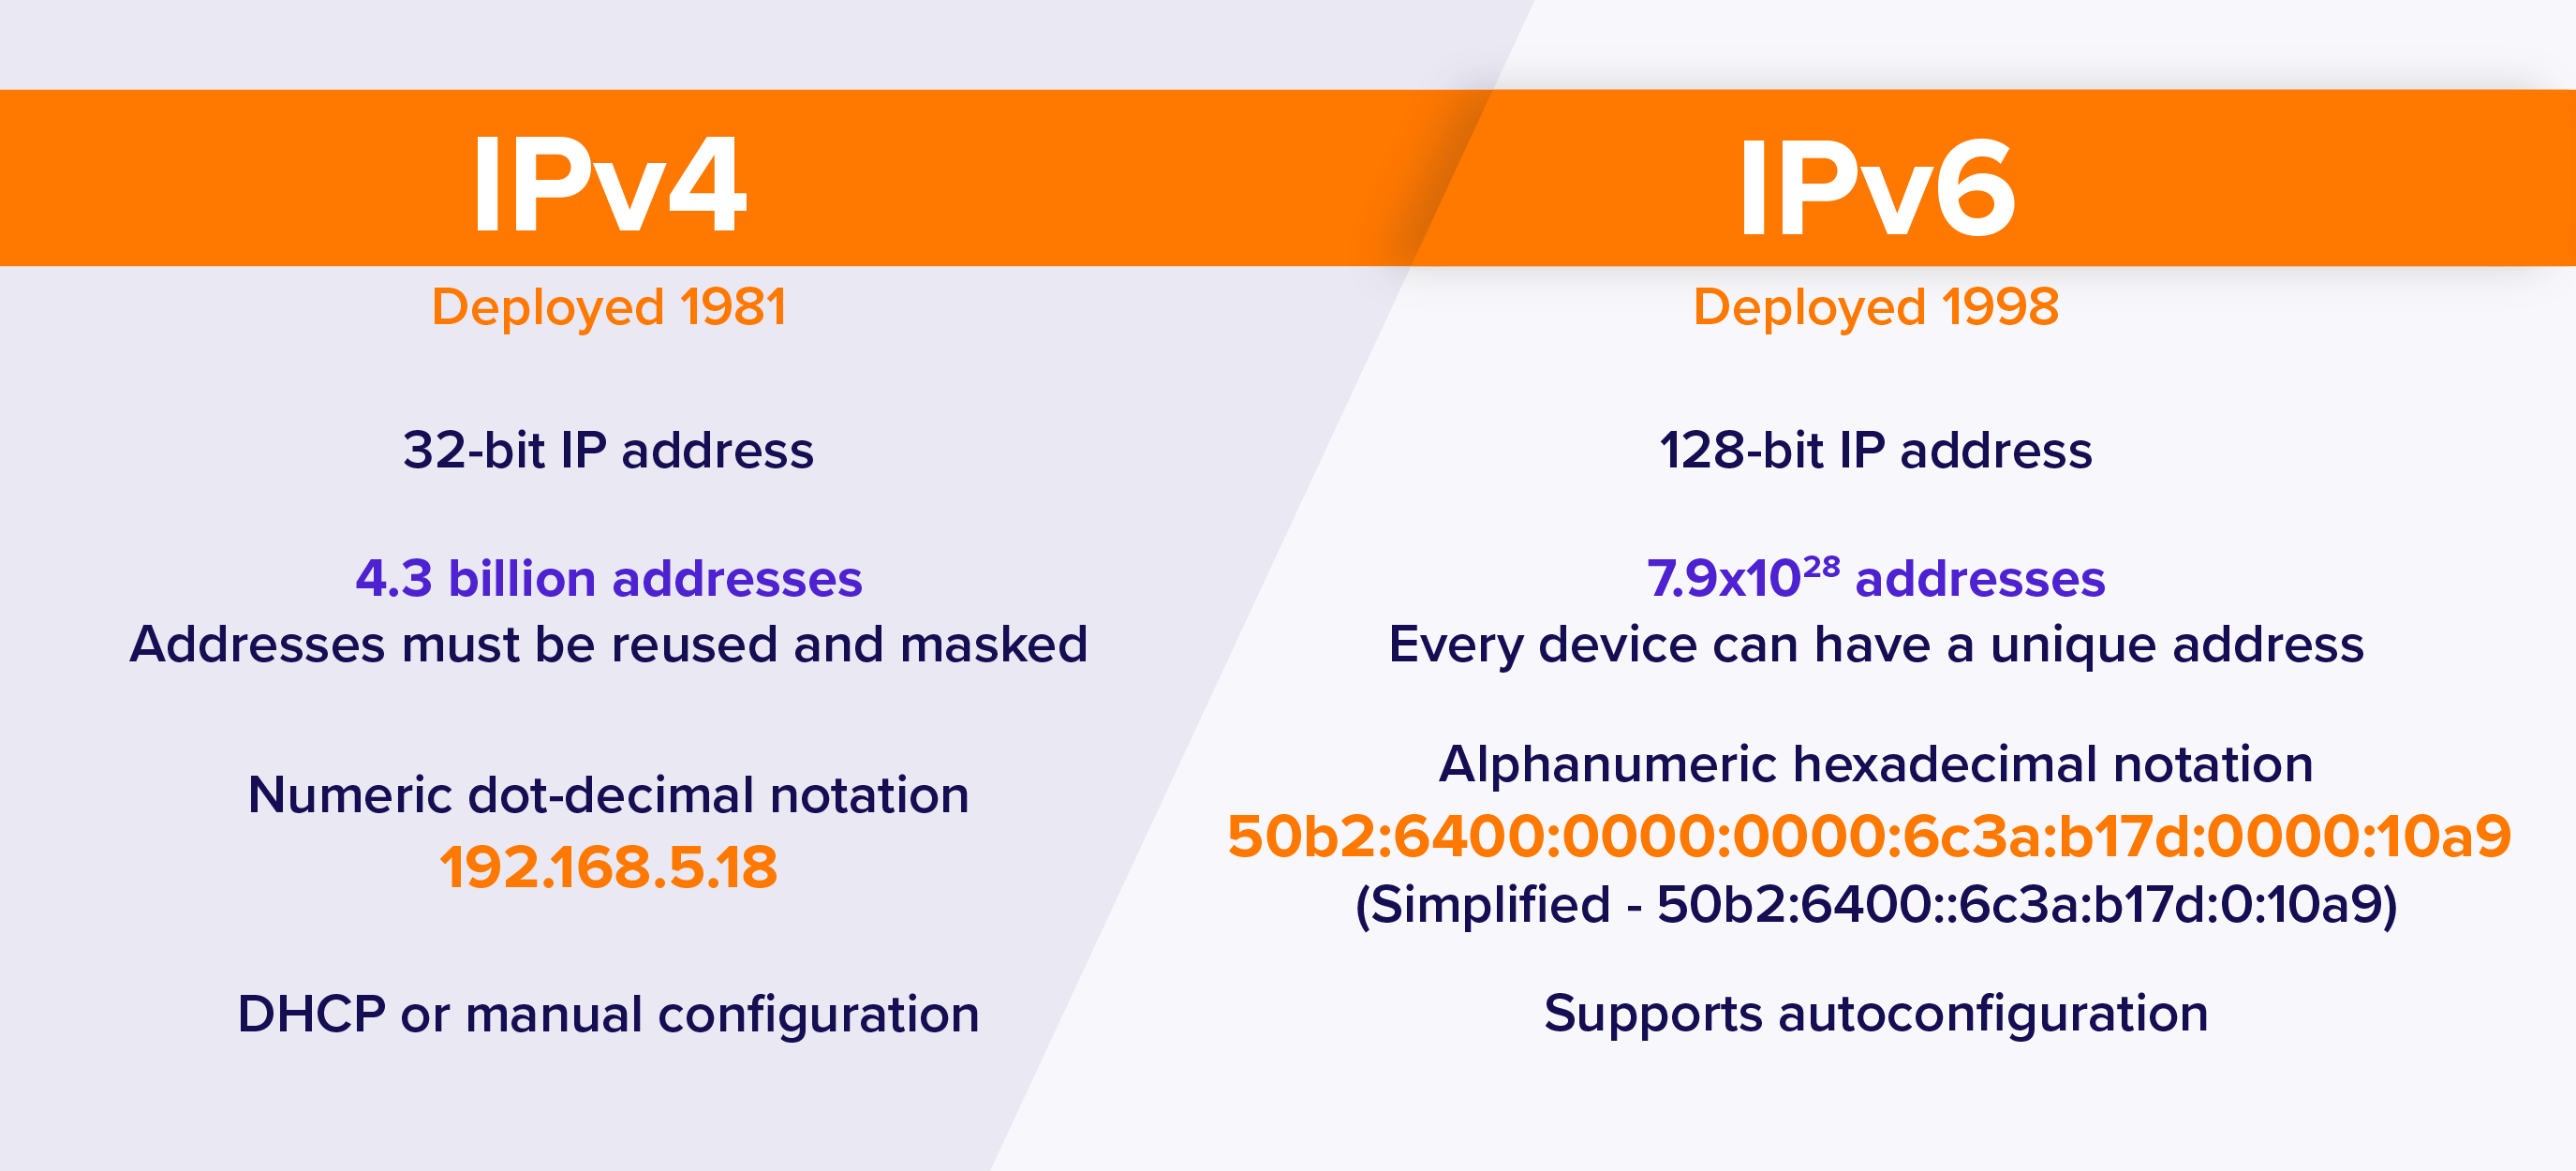 Is IPv6 more private than IPv4?